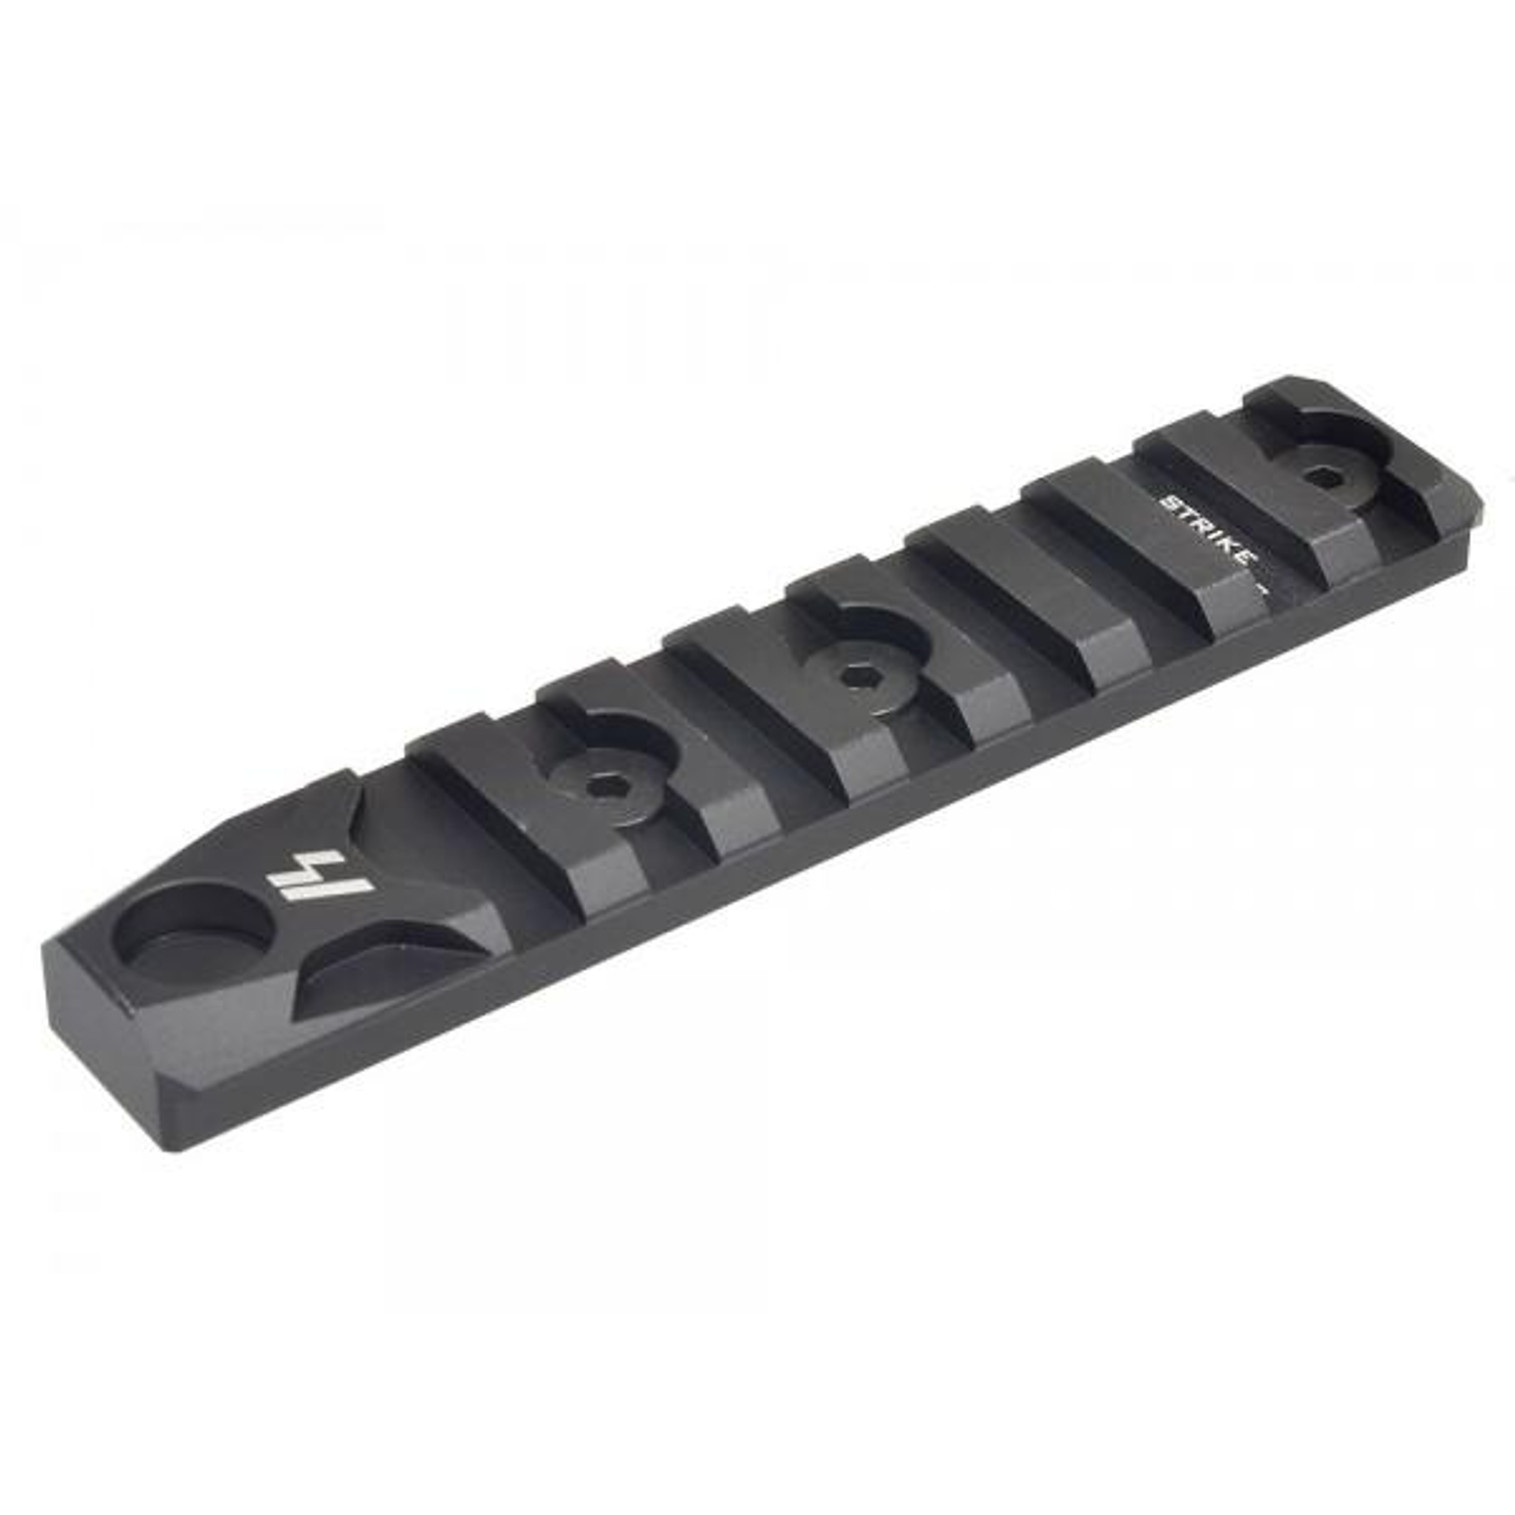 Madbull Airsoft Strike Industries KeyMod Rail Section with QD Adapter - 8 Slot Short Polymer